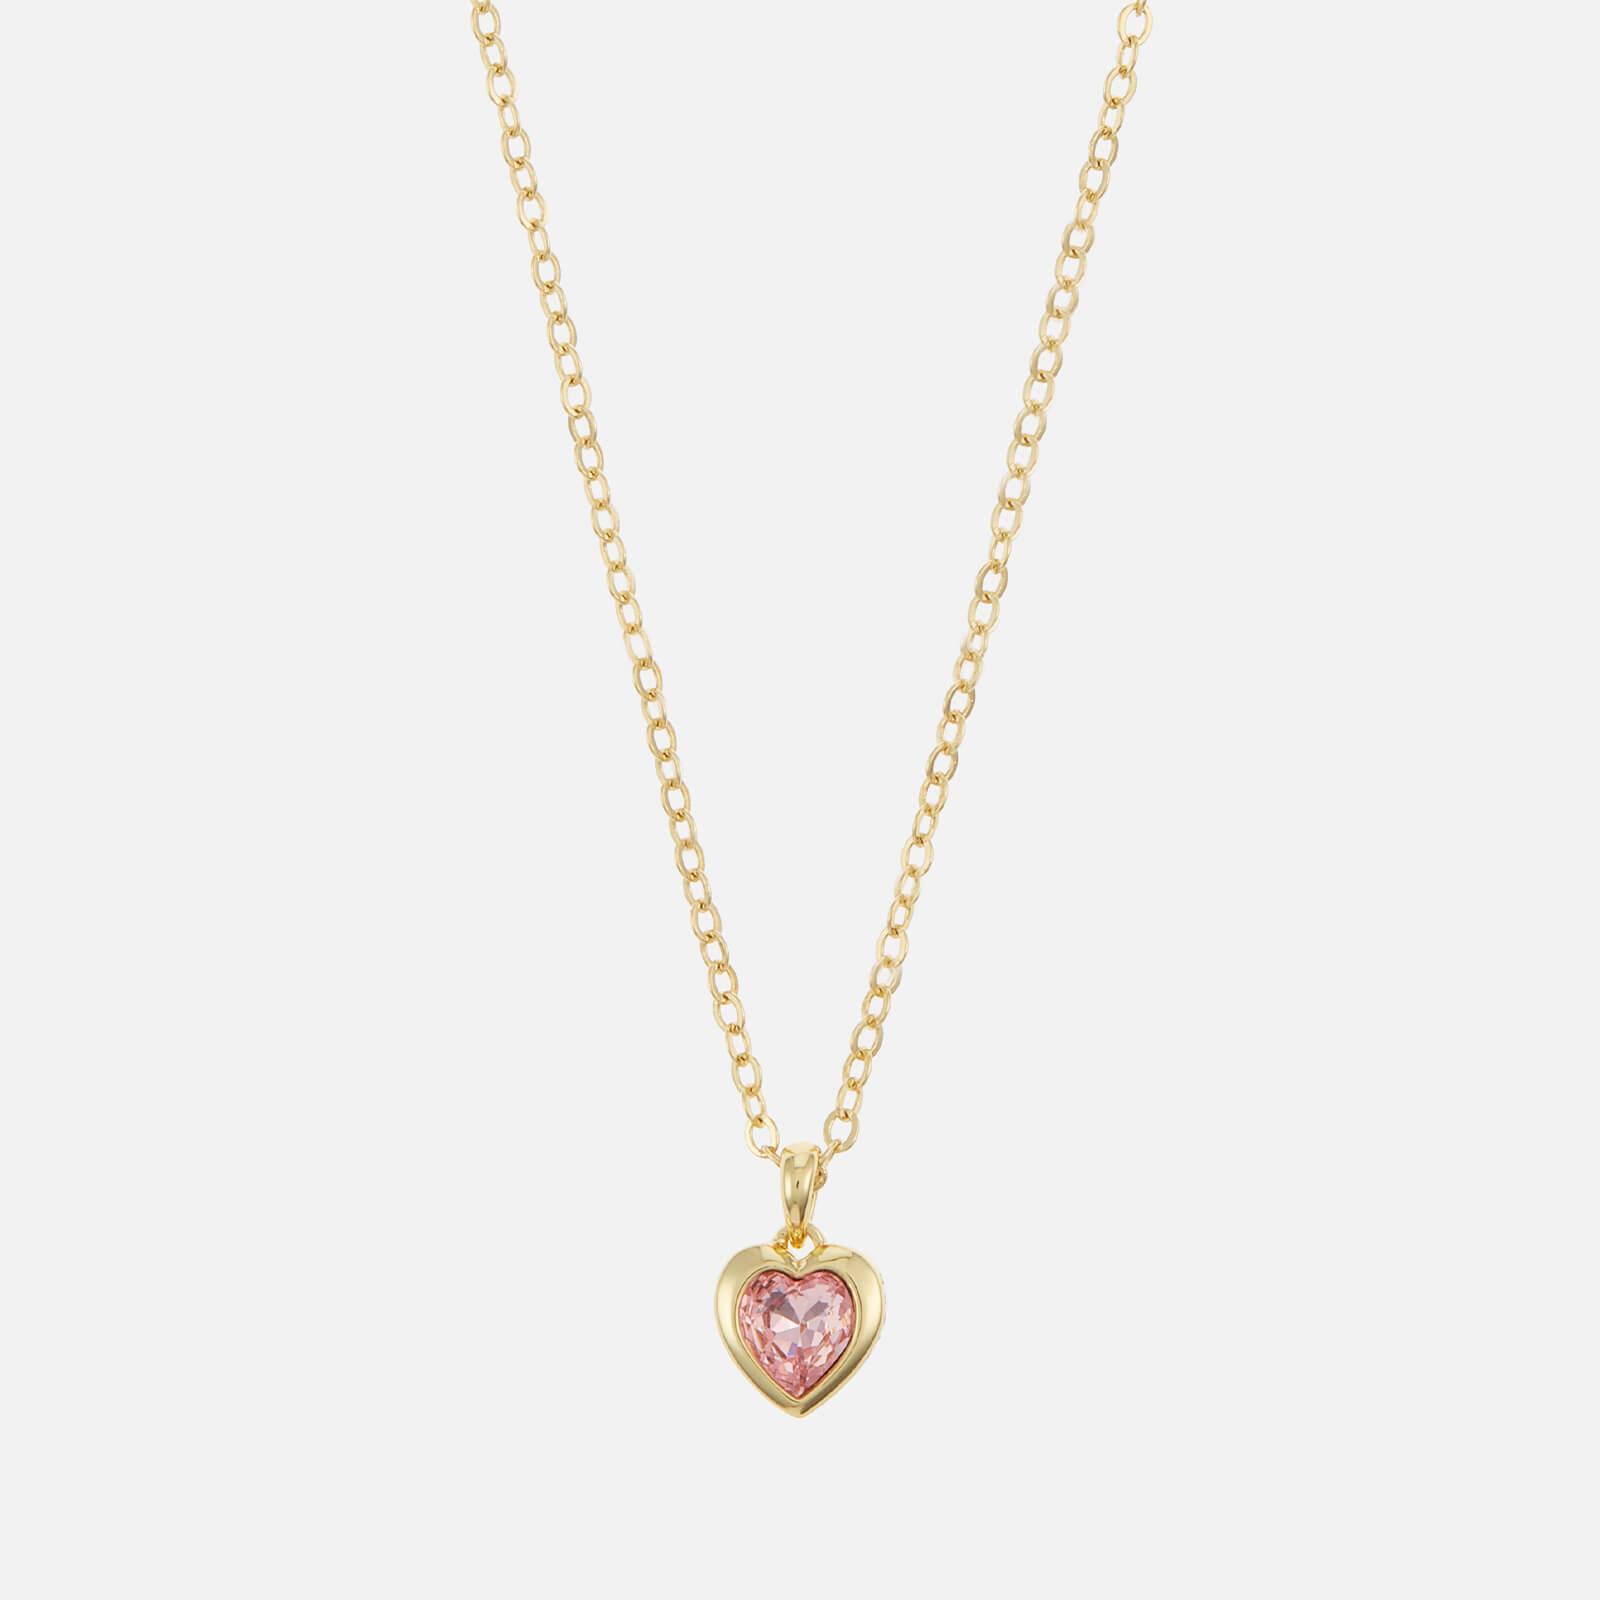 NWT Ted Baker Rose Gold Heart Necklace | Rose gold heart necklace, Gold heart  necklace, Womens jewelry necklace